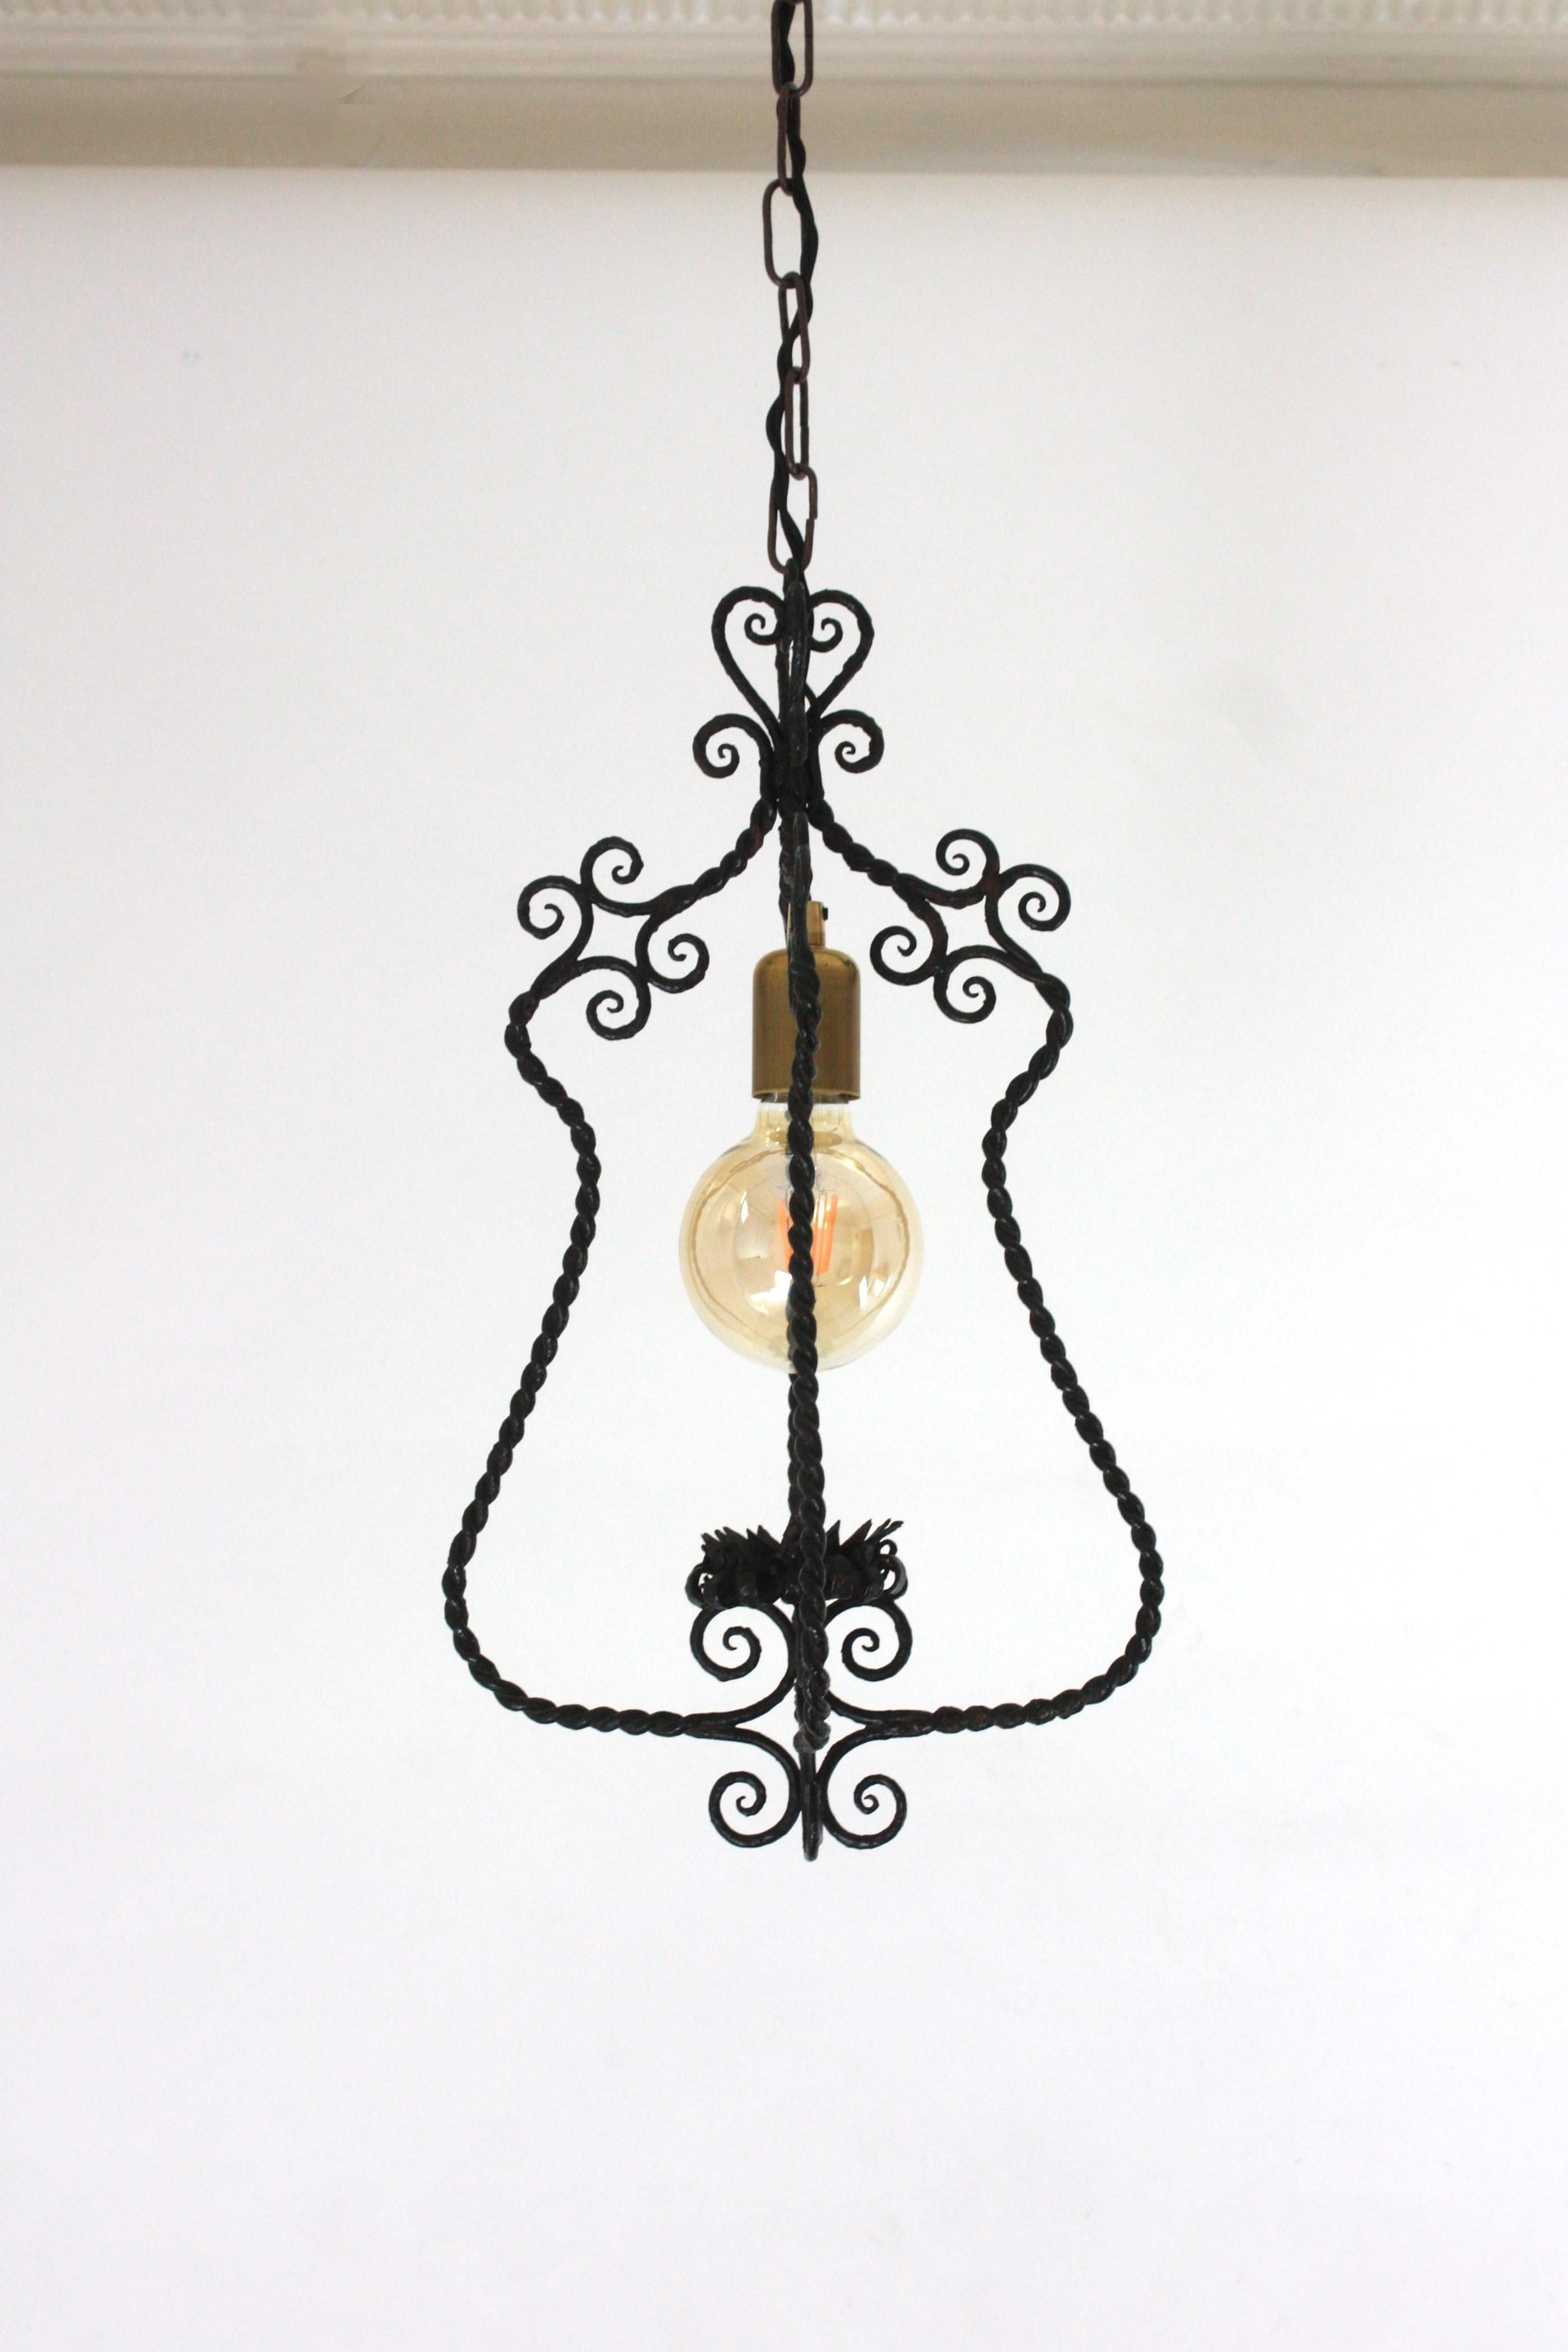 Spanish Lantern Pendant Lamp in Wrought Iron, Scroll Twisting Design, 1940s In Good Condition For Sale In Barcelona, ES